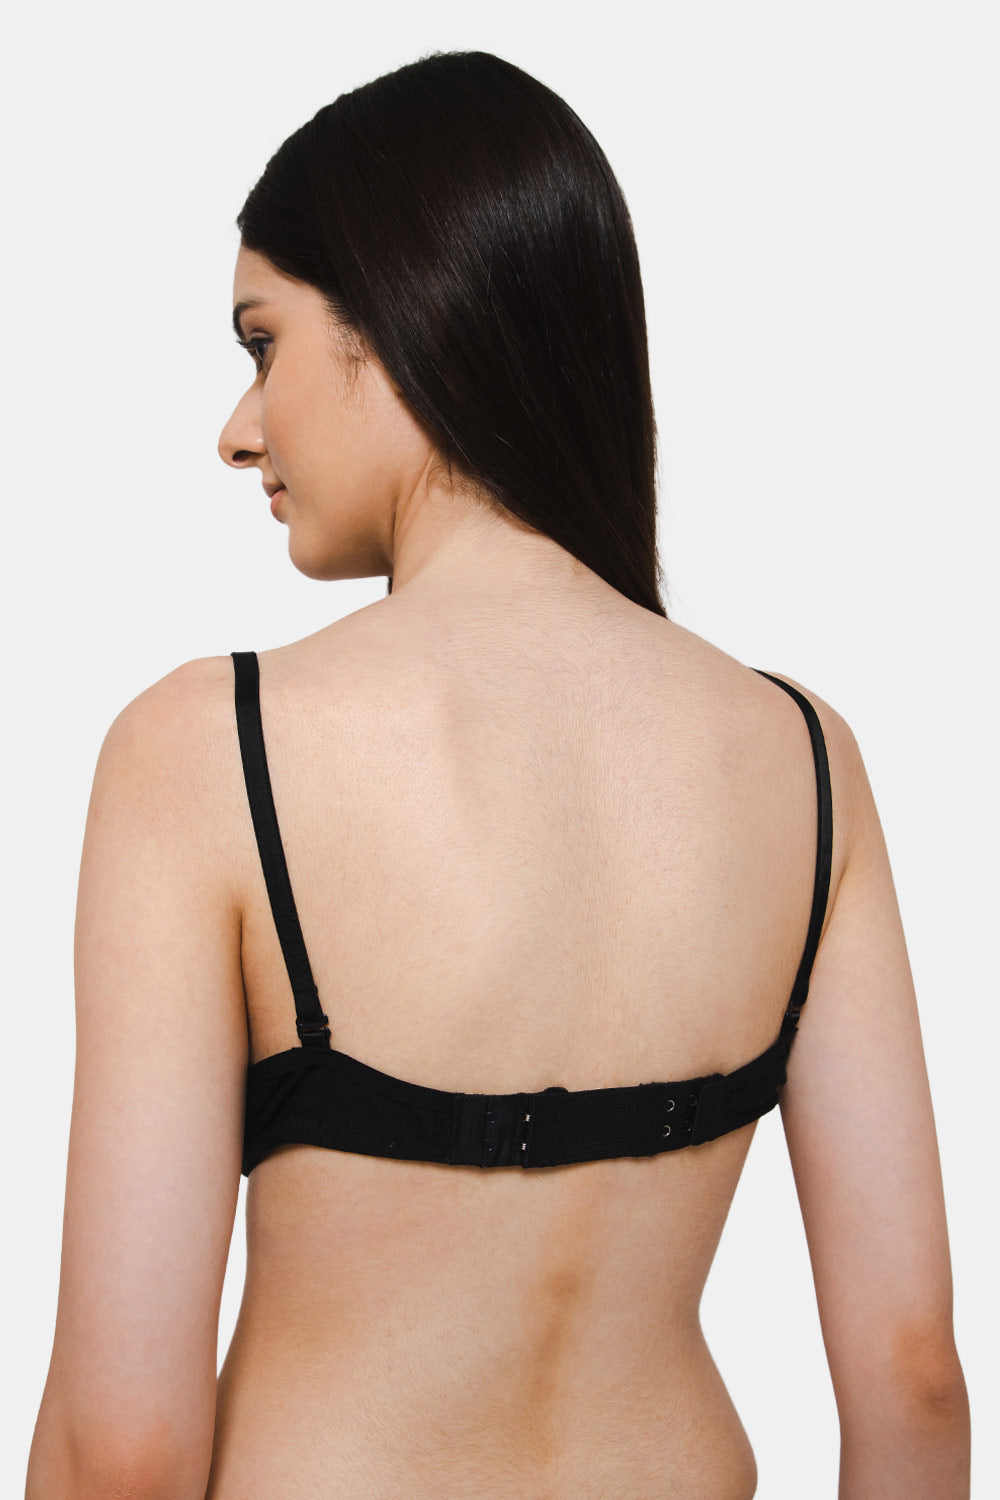 More of Me to Love Stretch Elastic Bra Extender, India